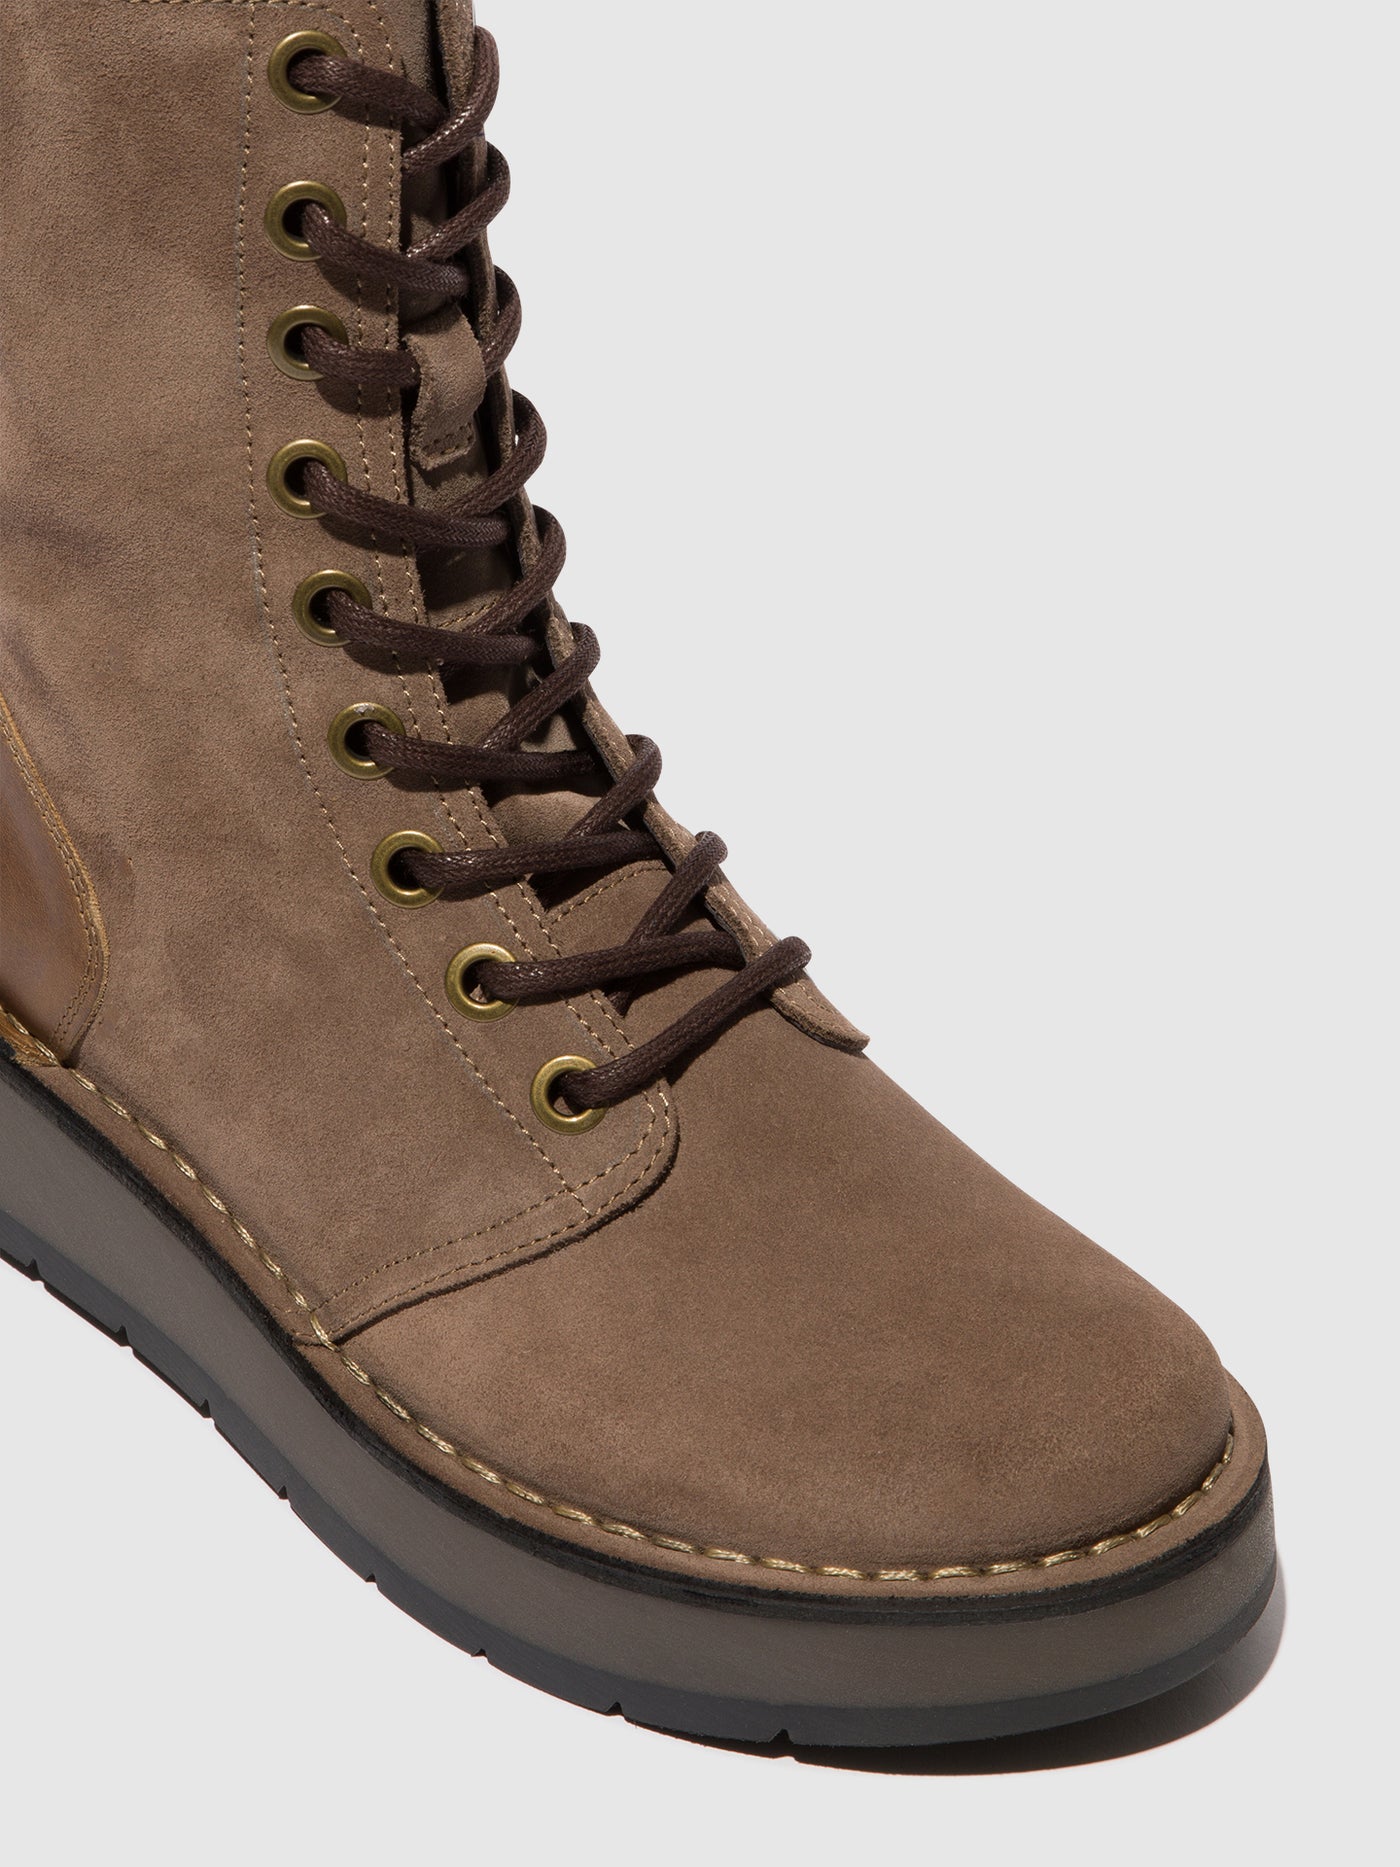 Lace-up Ankle Boots RAMI043FLY TAUPE/CAMEL